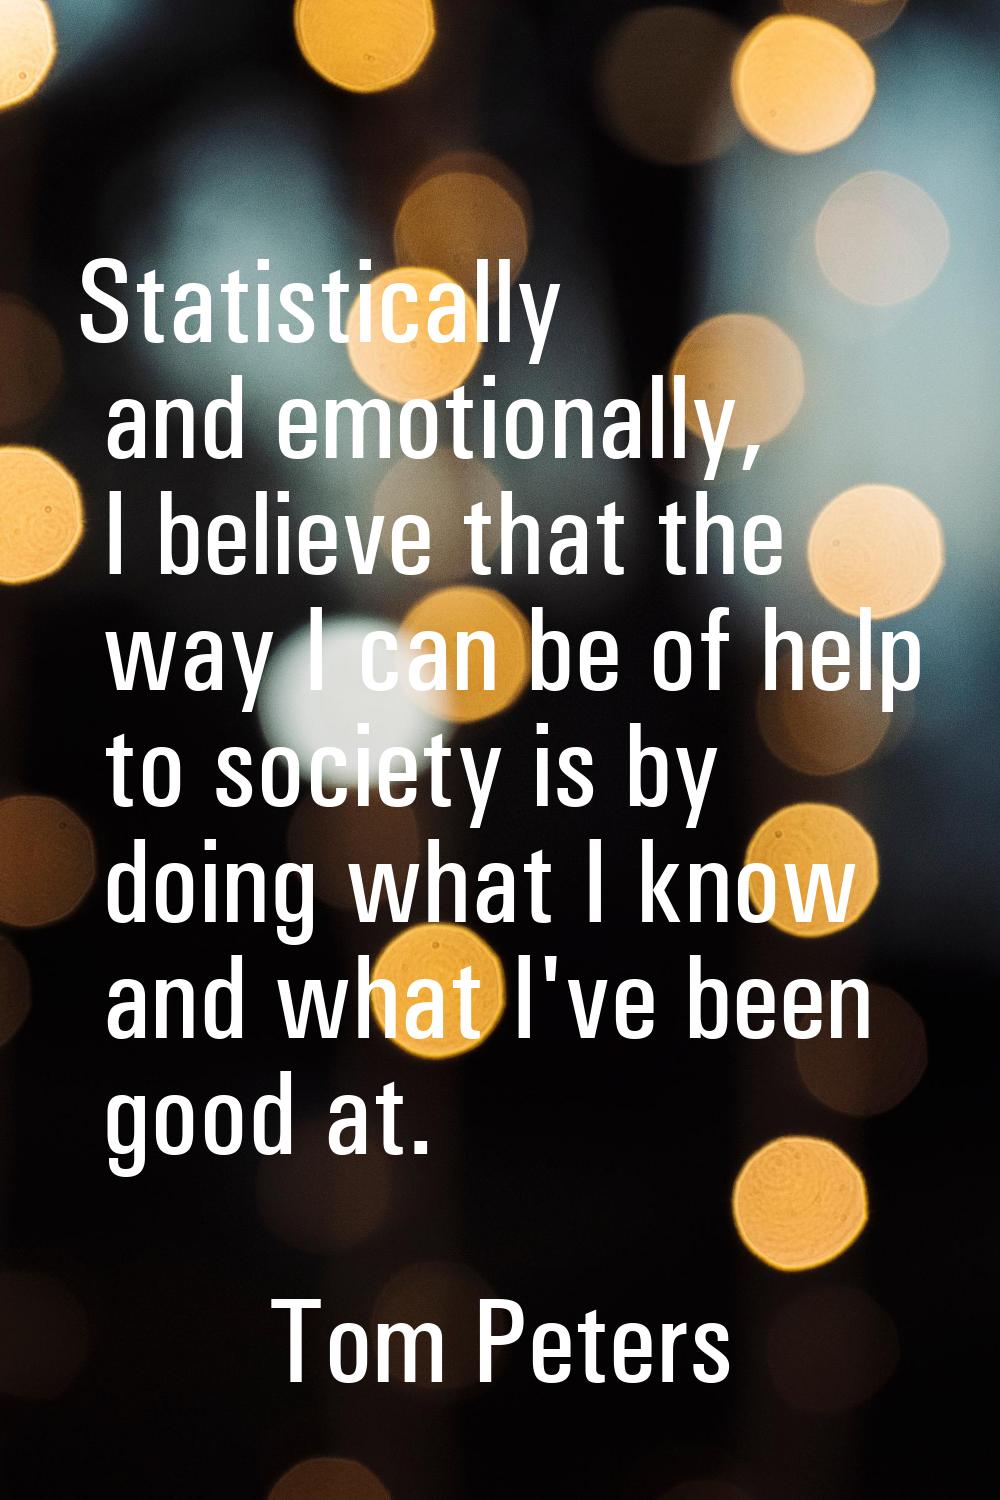 Statistically and emotionally, I believe that the way I can be of help to society is by doing what 